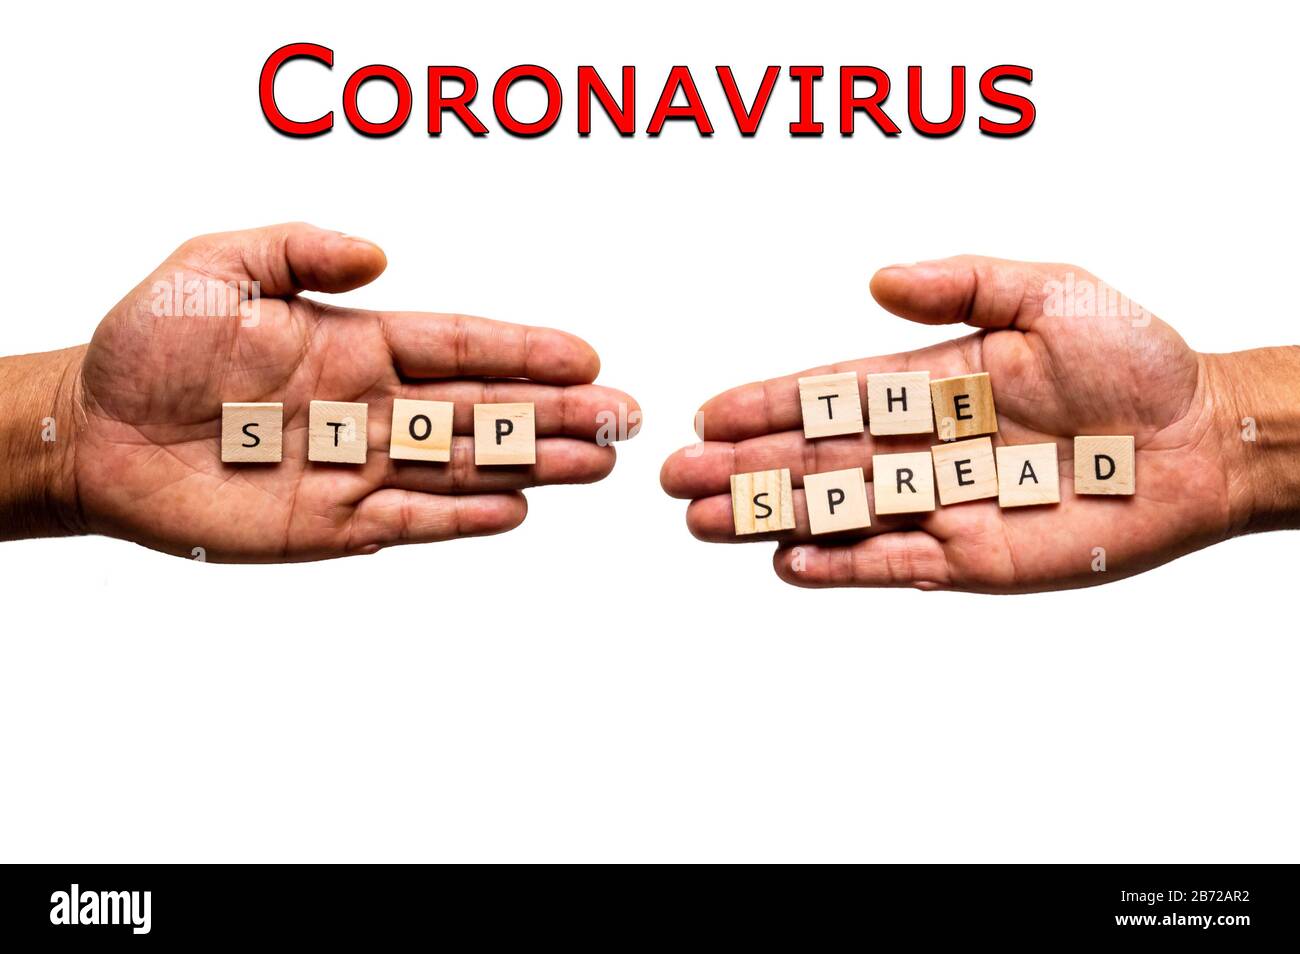 Coronavirus. Two hands display the message 'STOP THE SPREAD'. Stock Photo